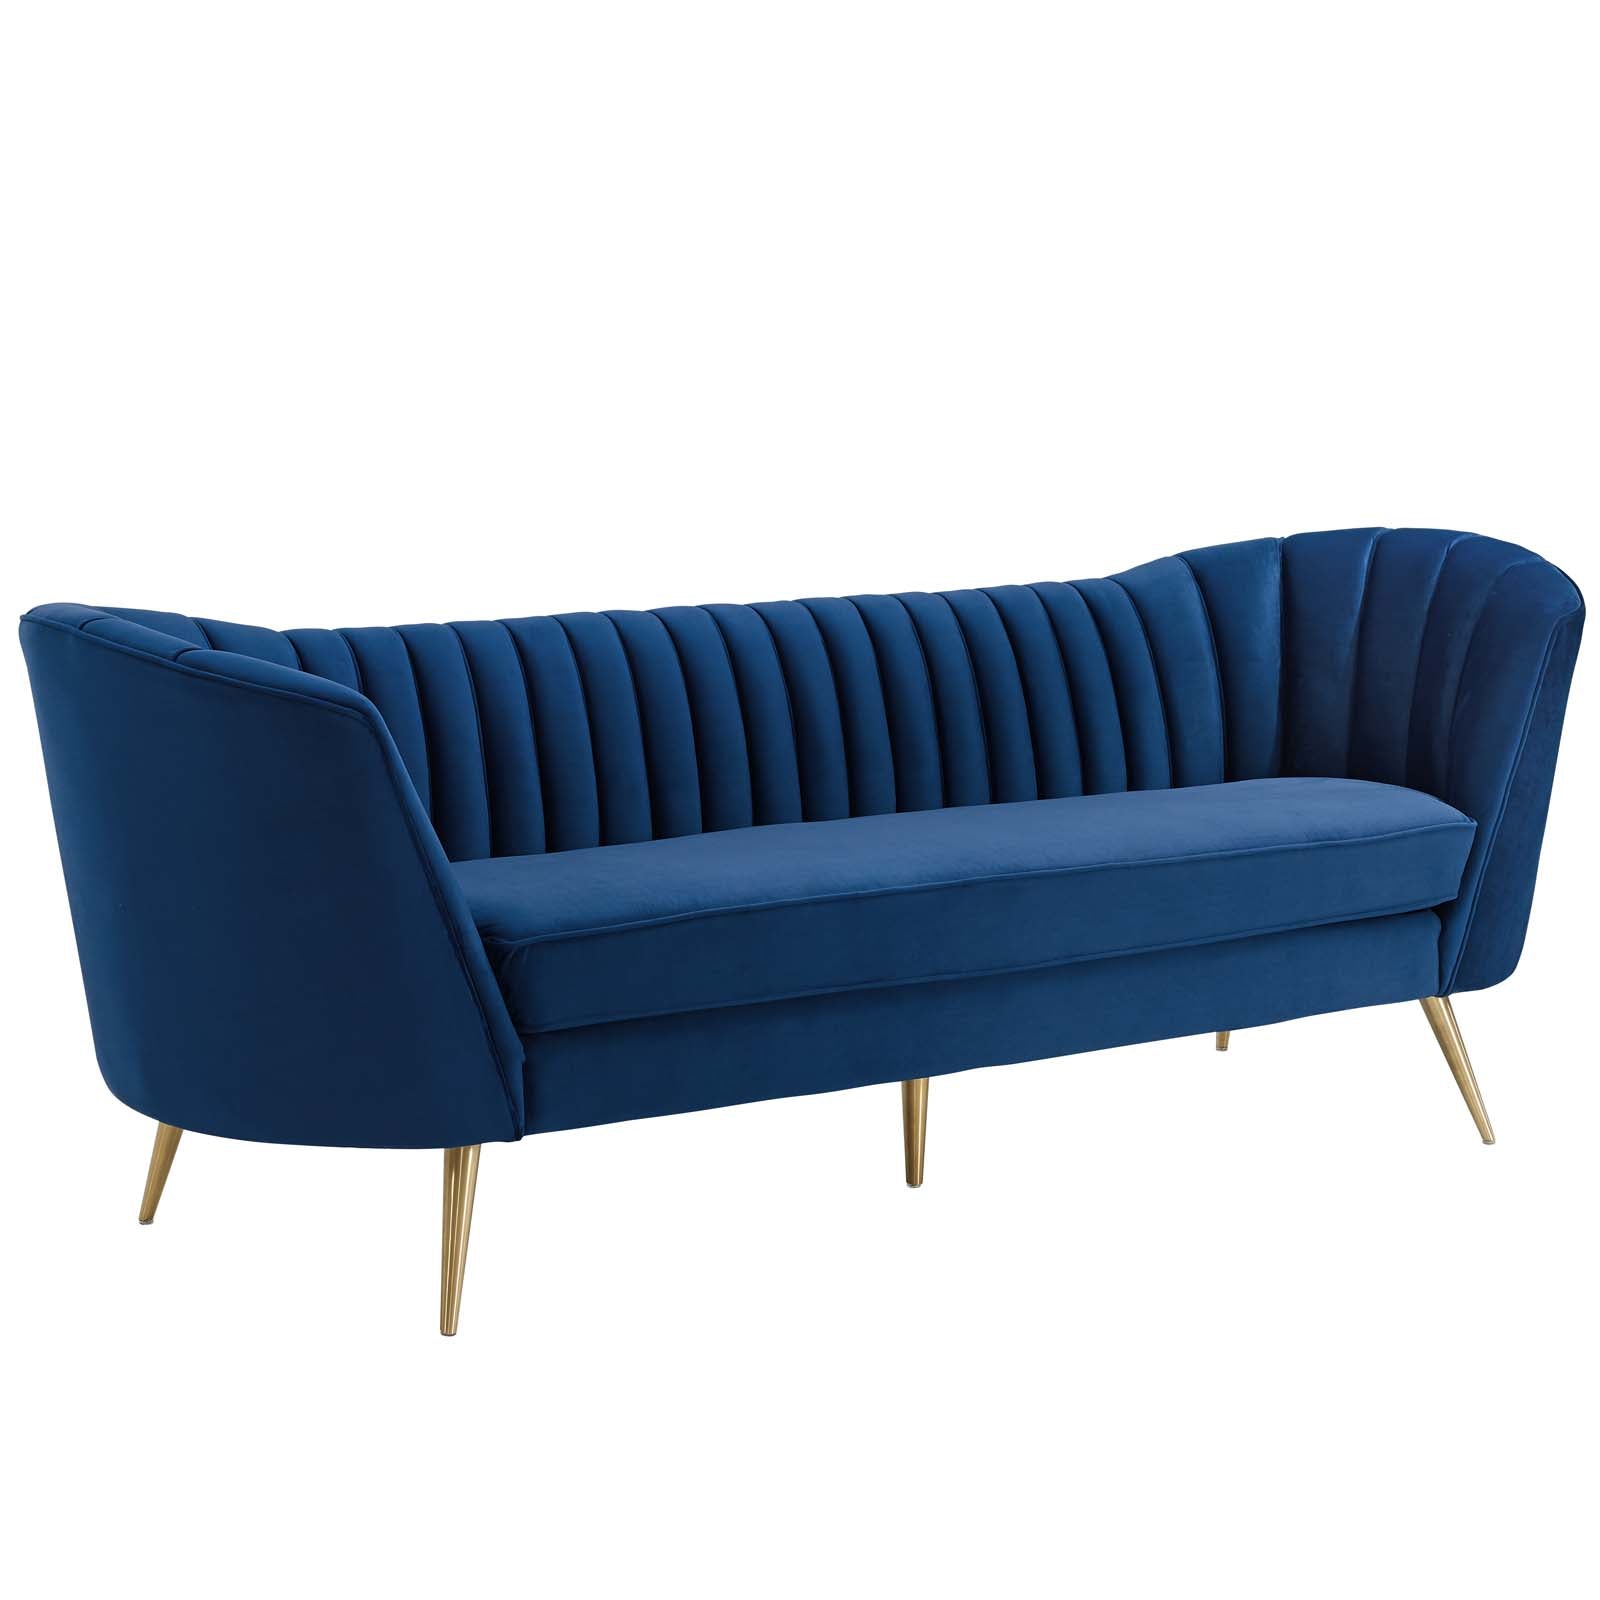 Modway Living Room Sets - Opportunity Performance Velvet Sofa and Armchair Set Navy